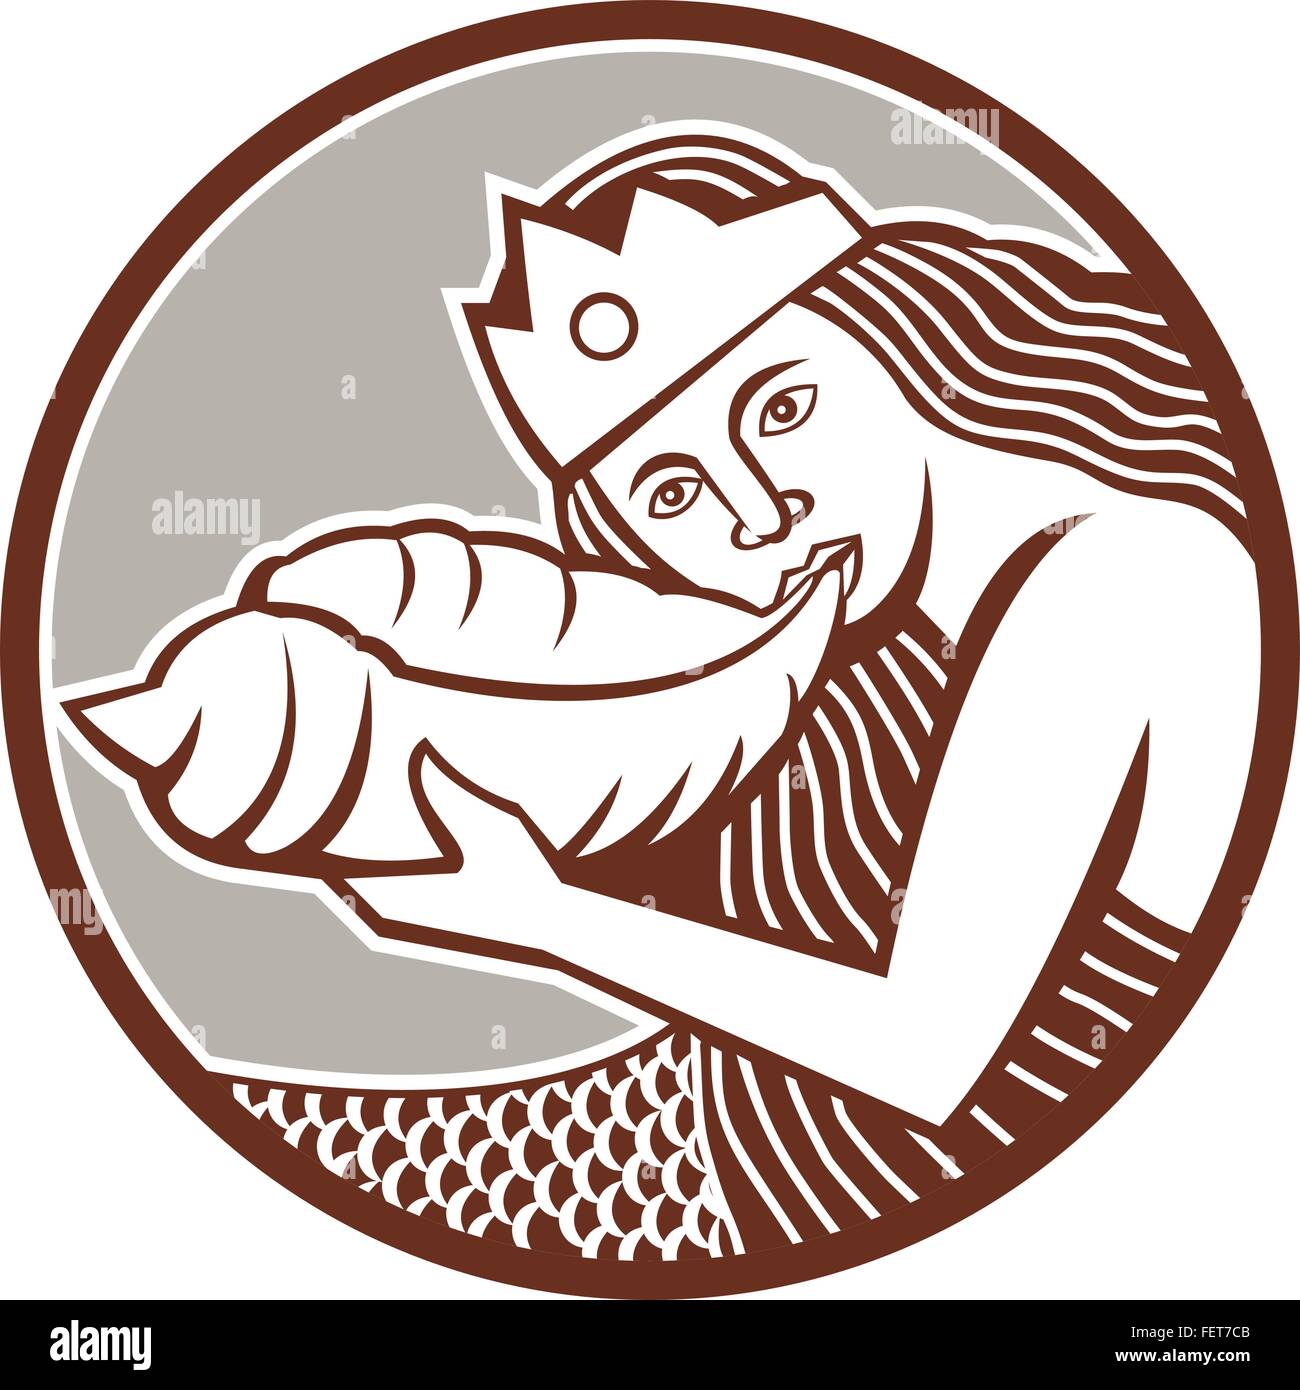 Illustration of a mermaid wearing crown blowing a shell horn set inside circle done in retro style on isolated backgound. Stock Vector